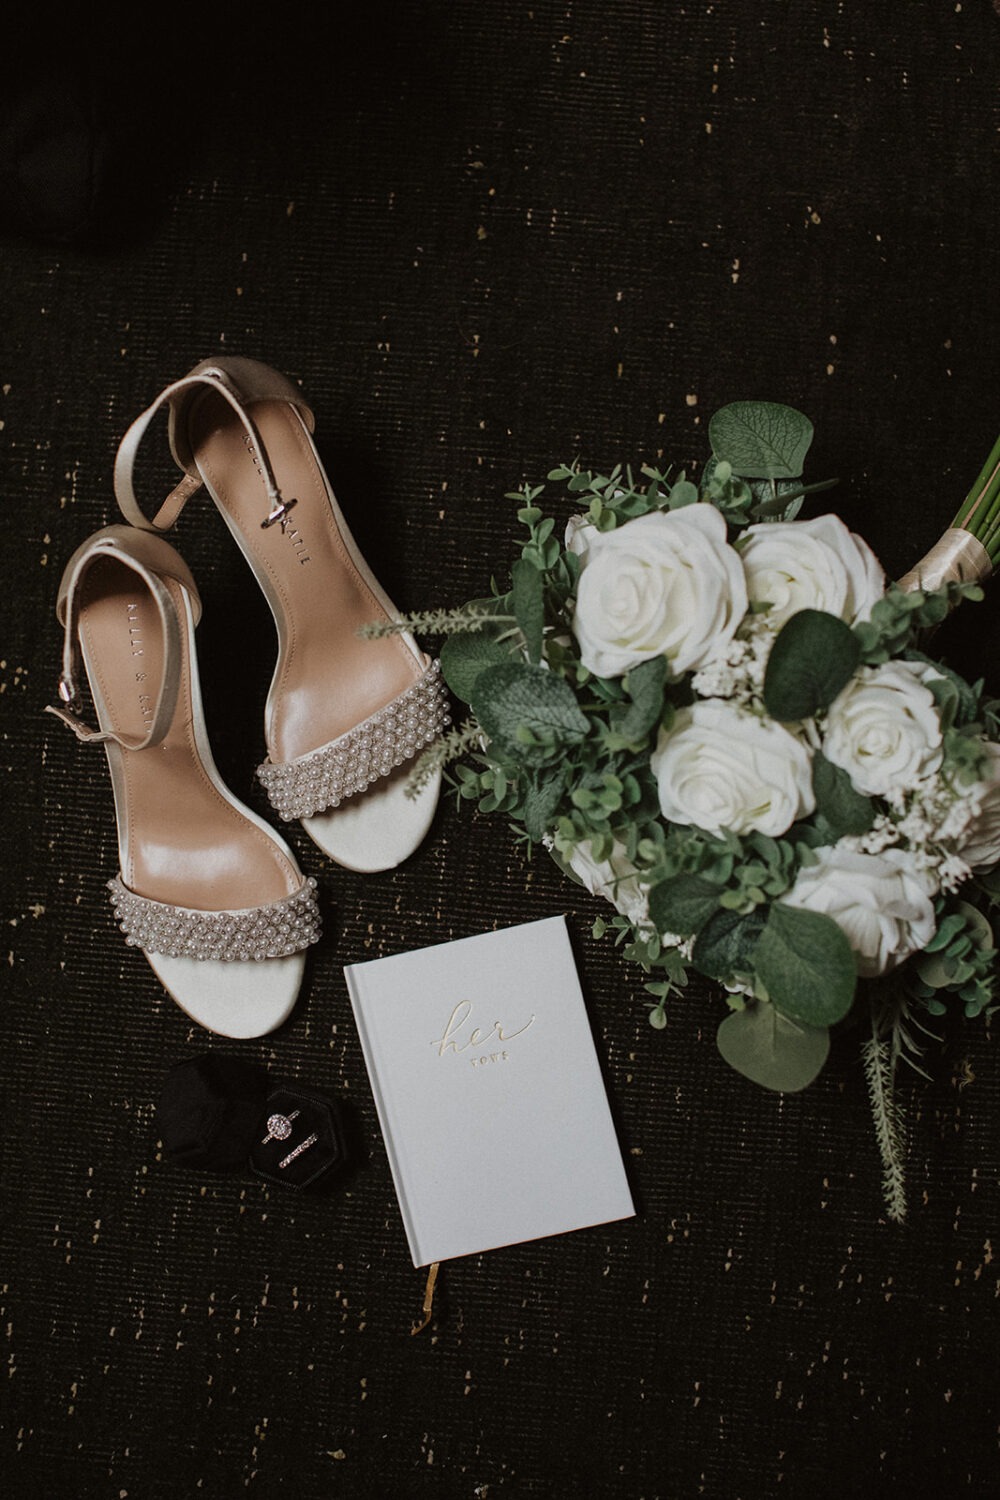 wedding accessories and white rose bouquet 